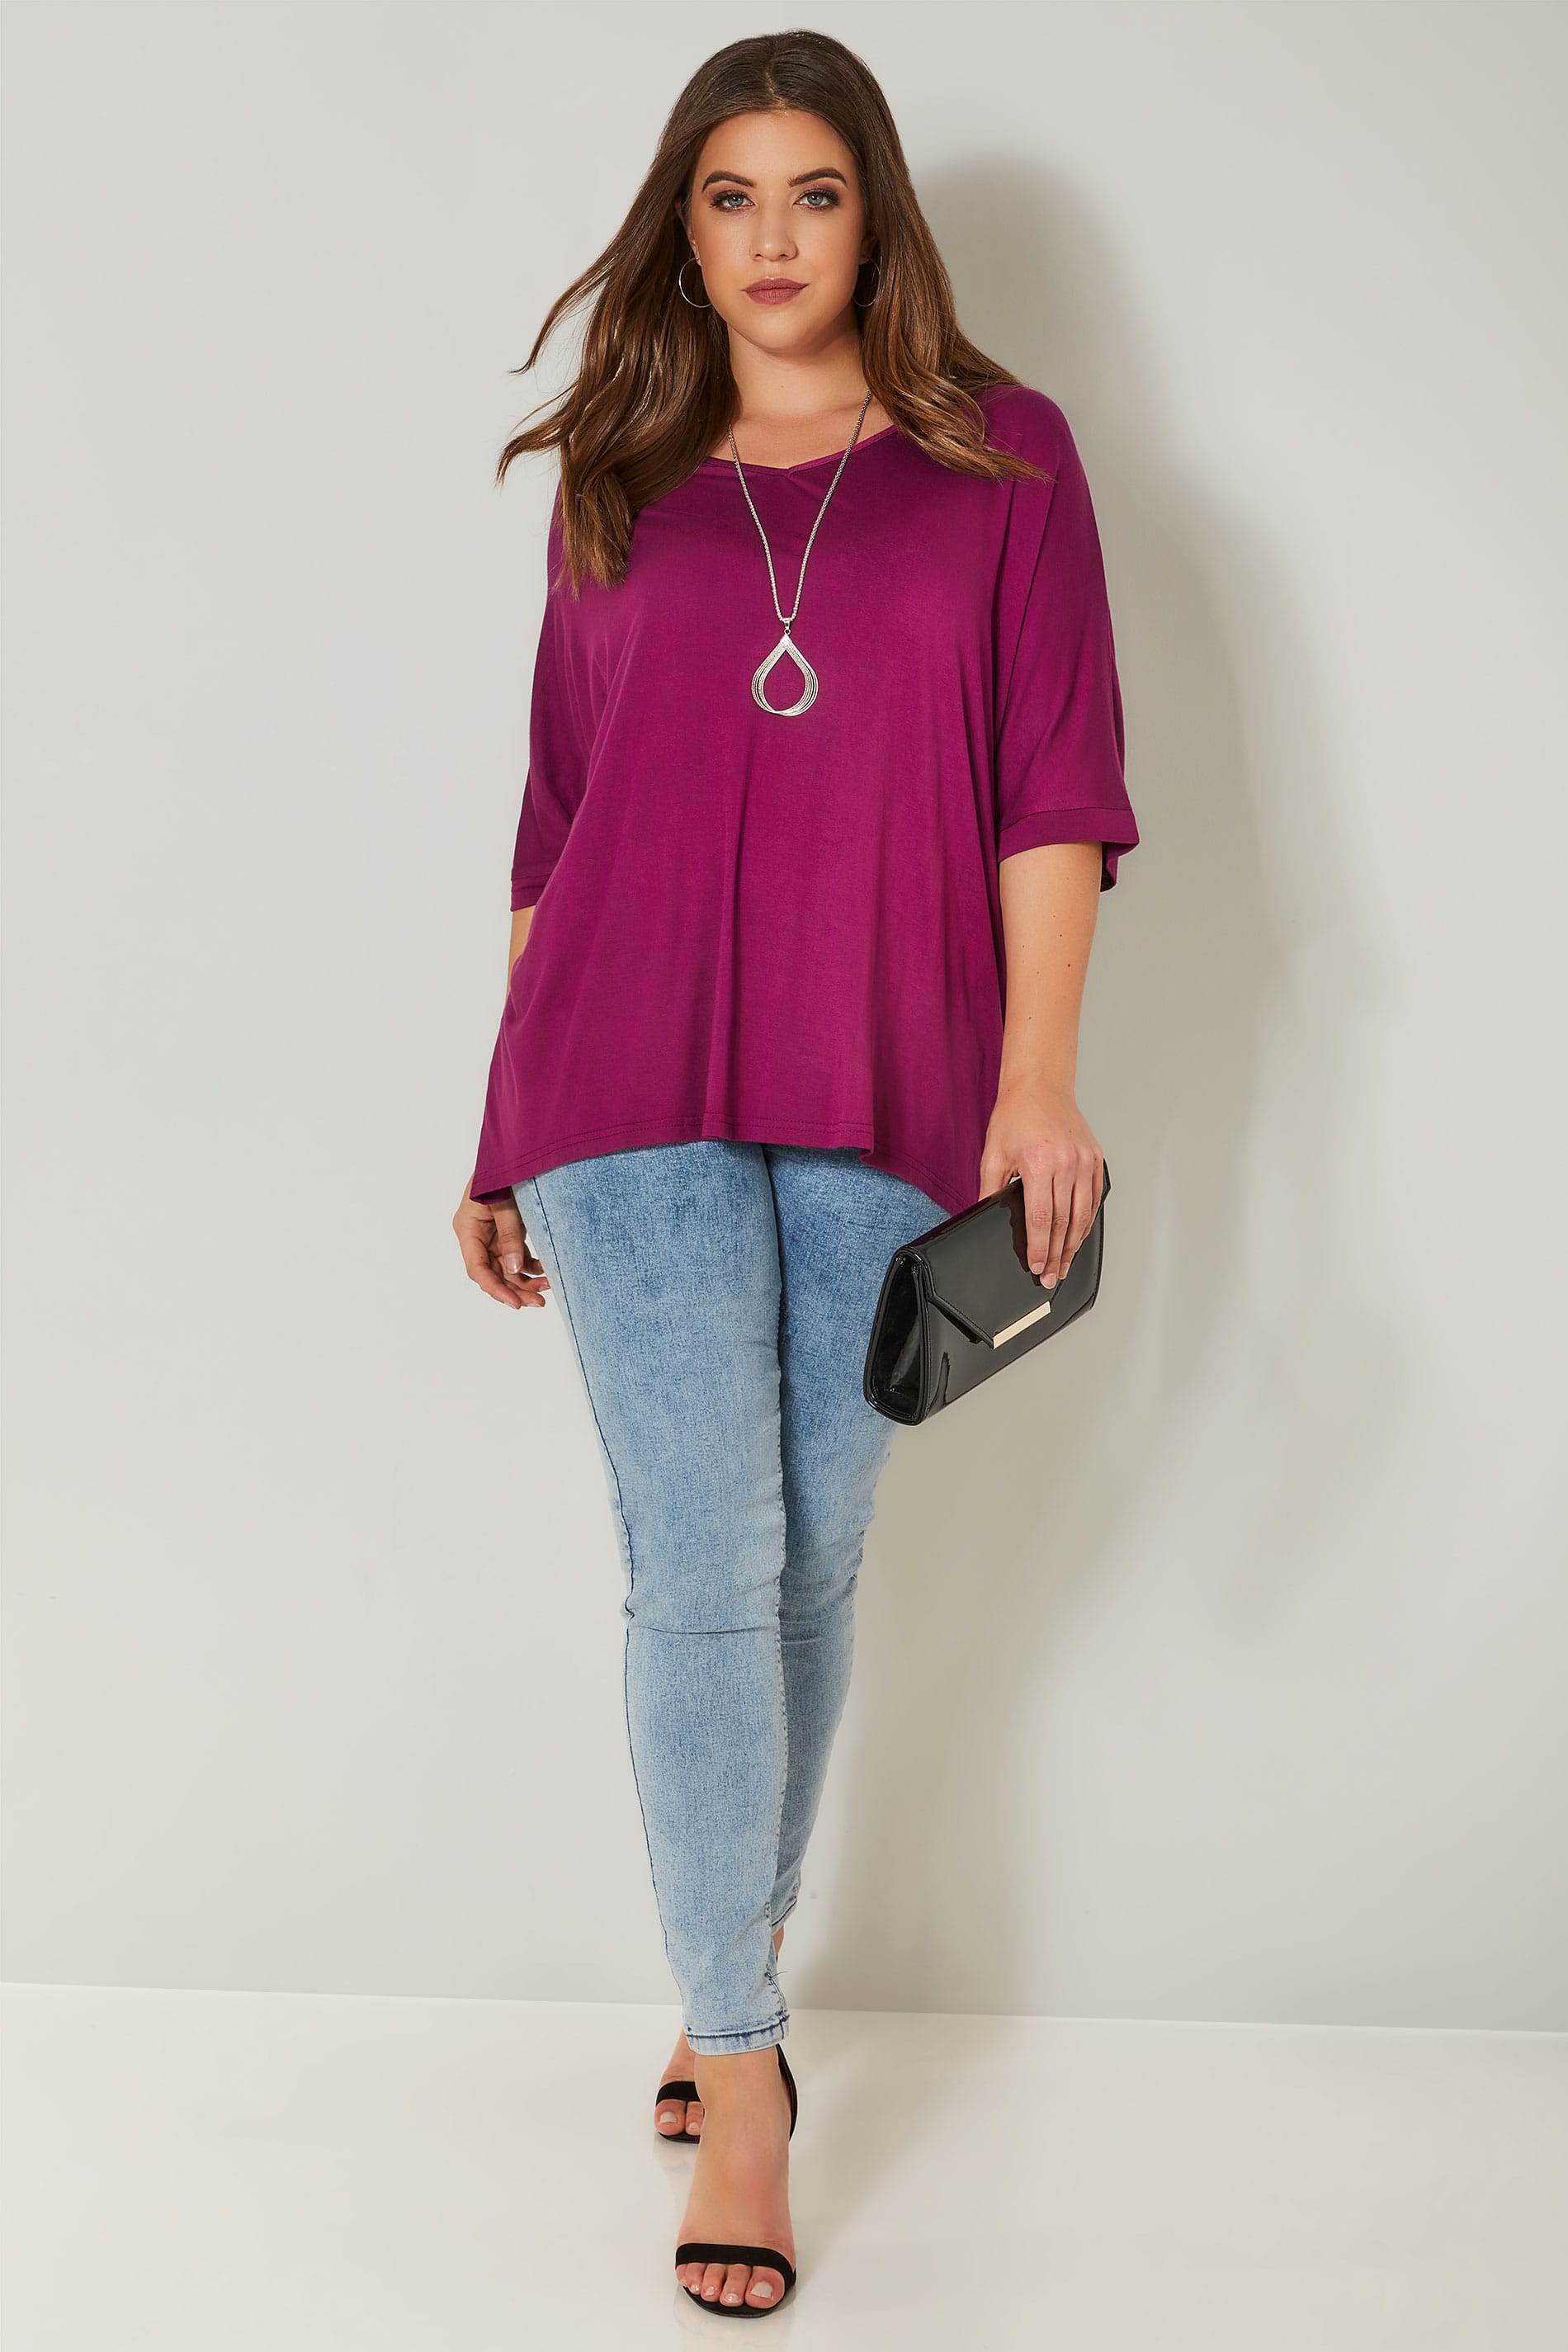 Magenta Pink Jersey Top, Plus size 16 to 36